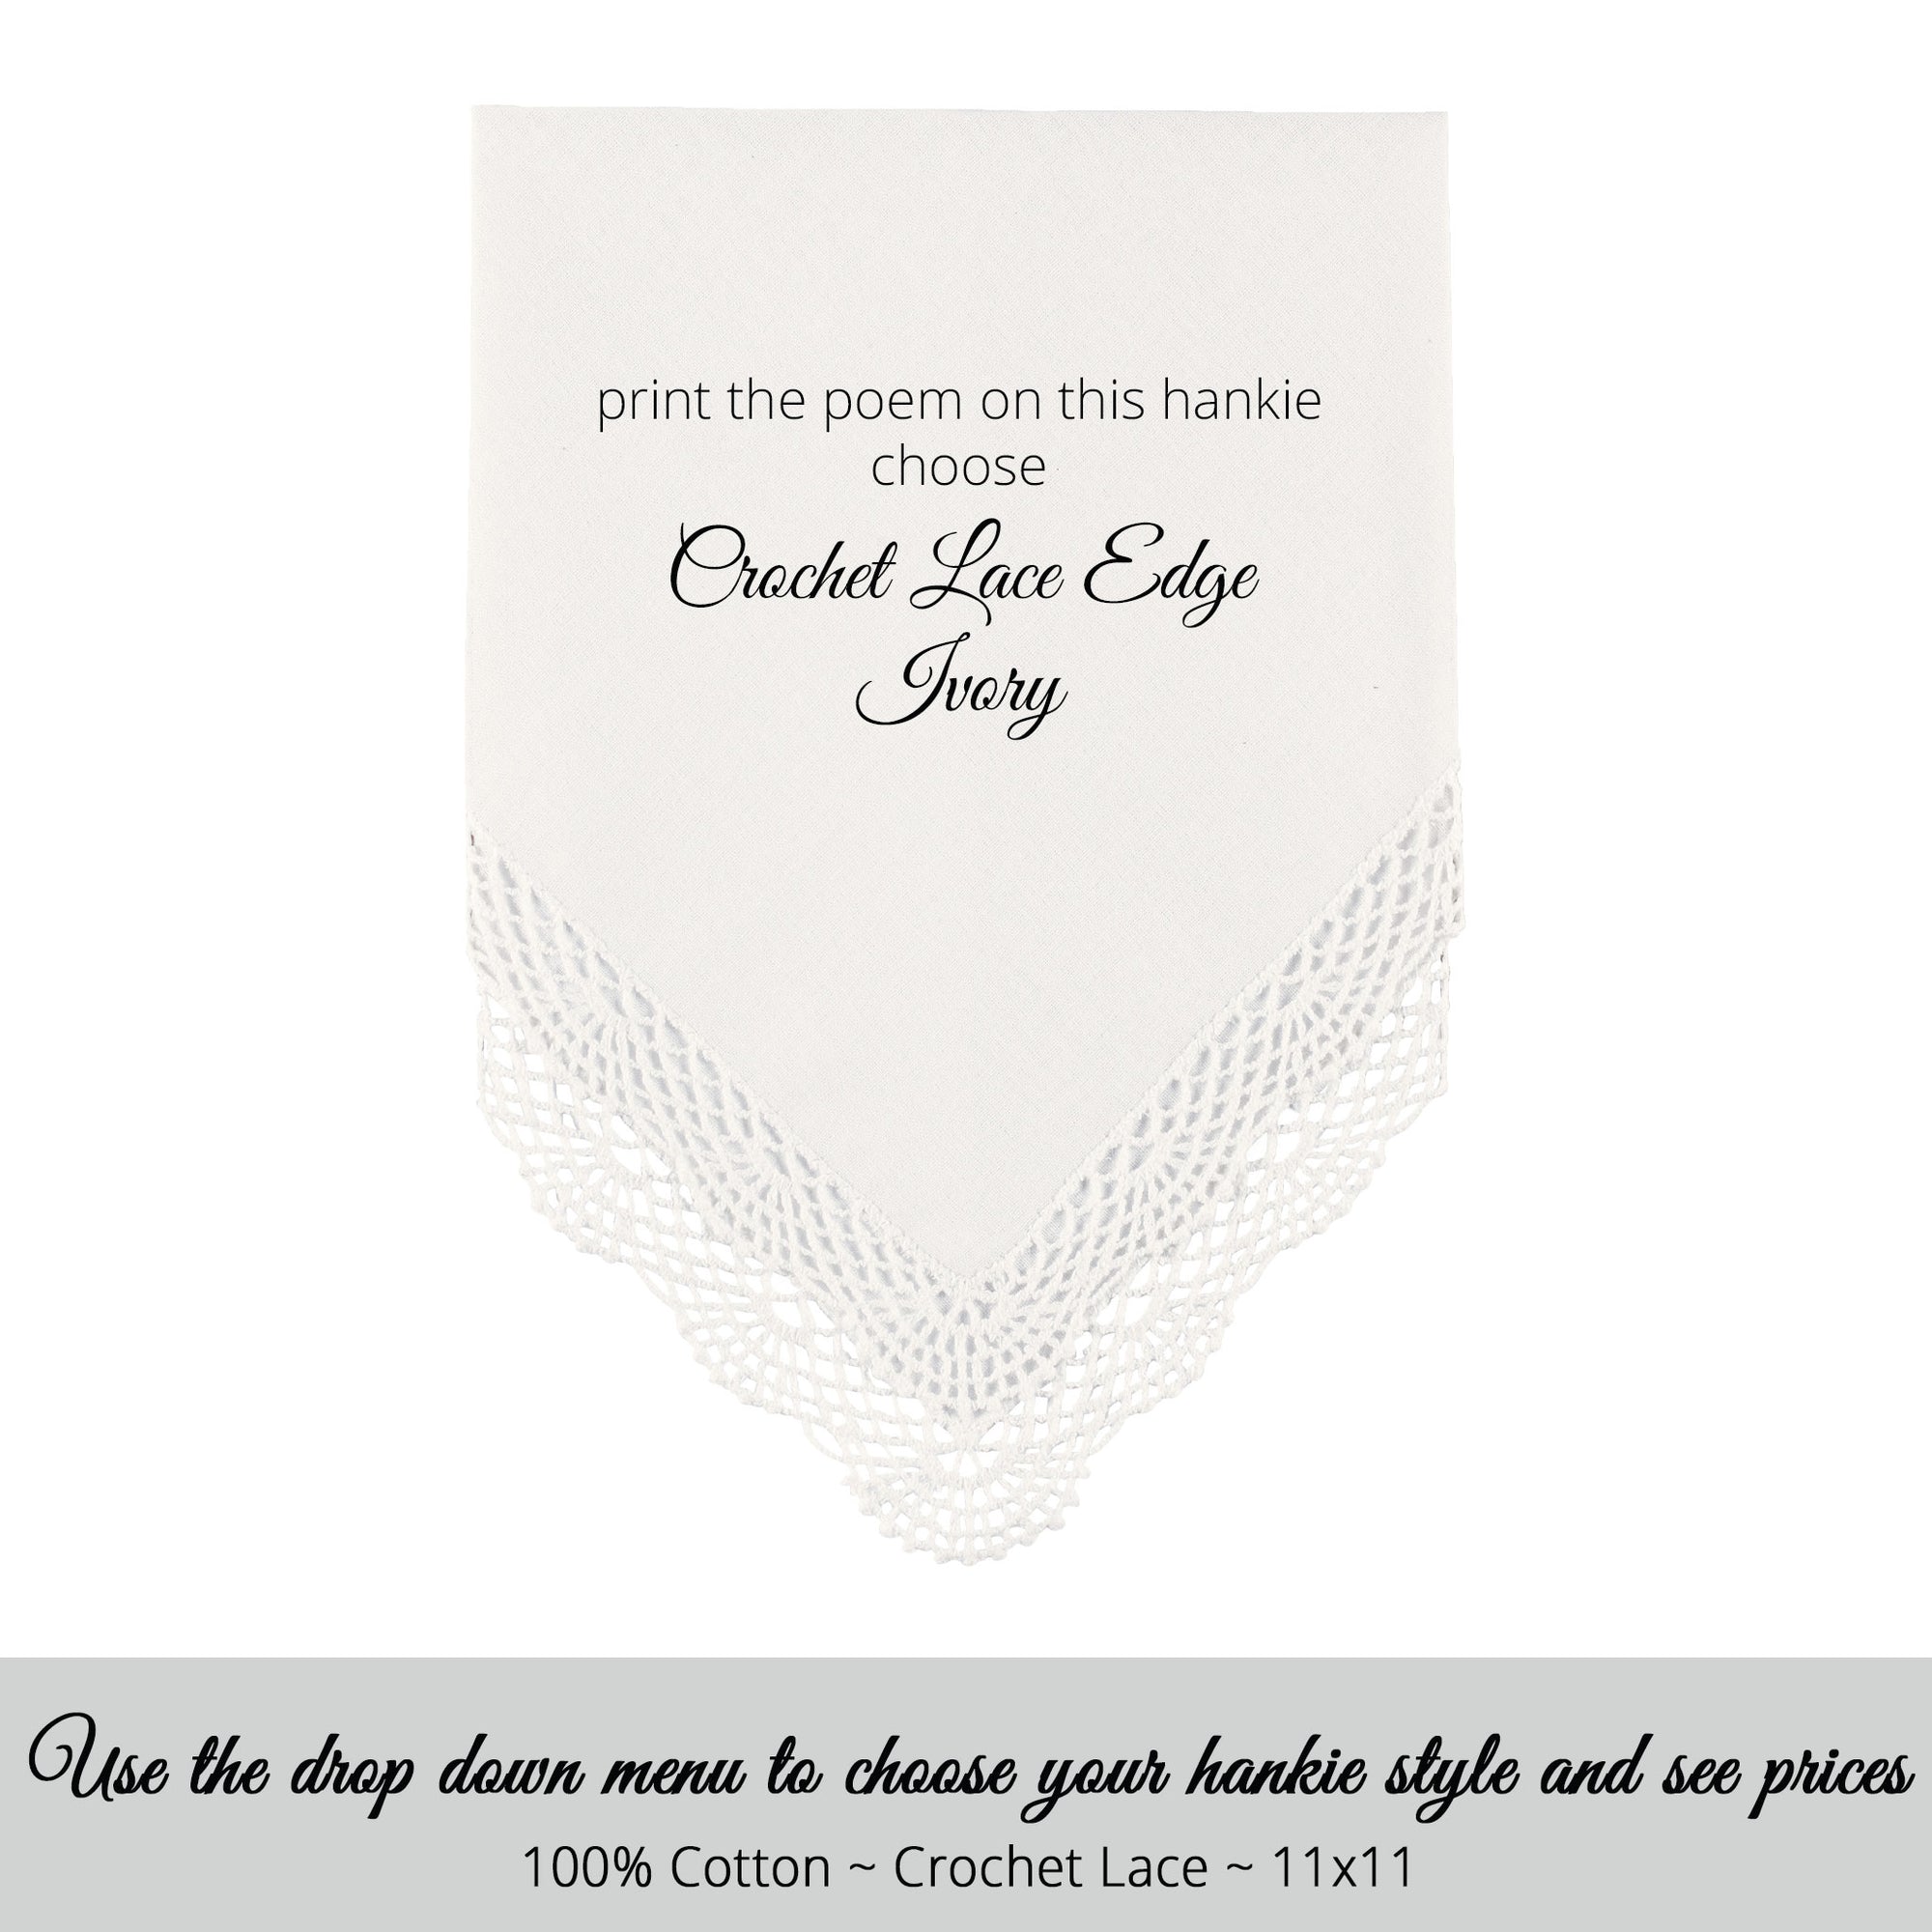 Wedding handkerchief ivory with crochet lace edge for the bride poem printed hankie